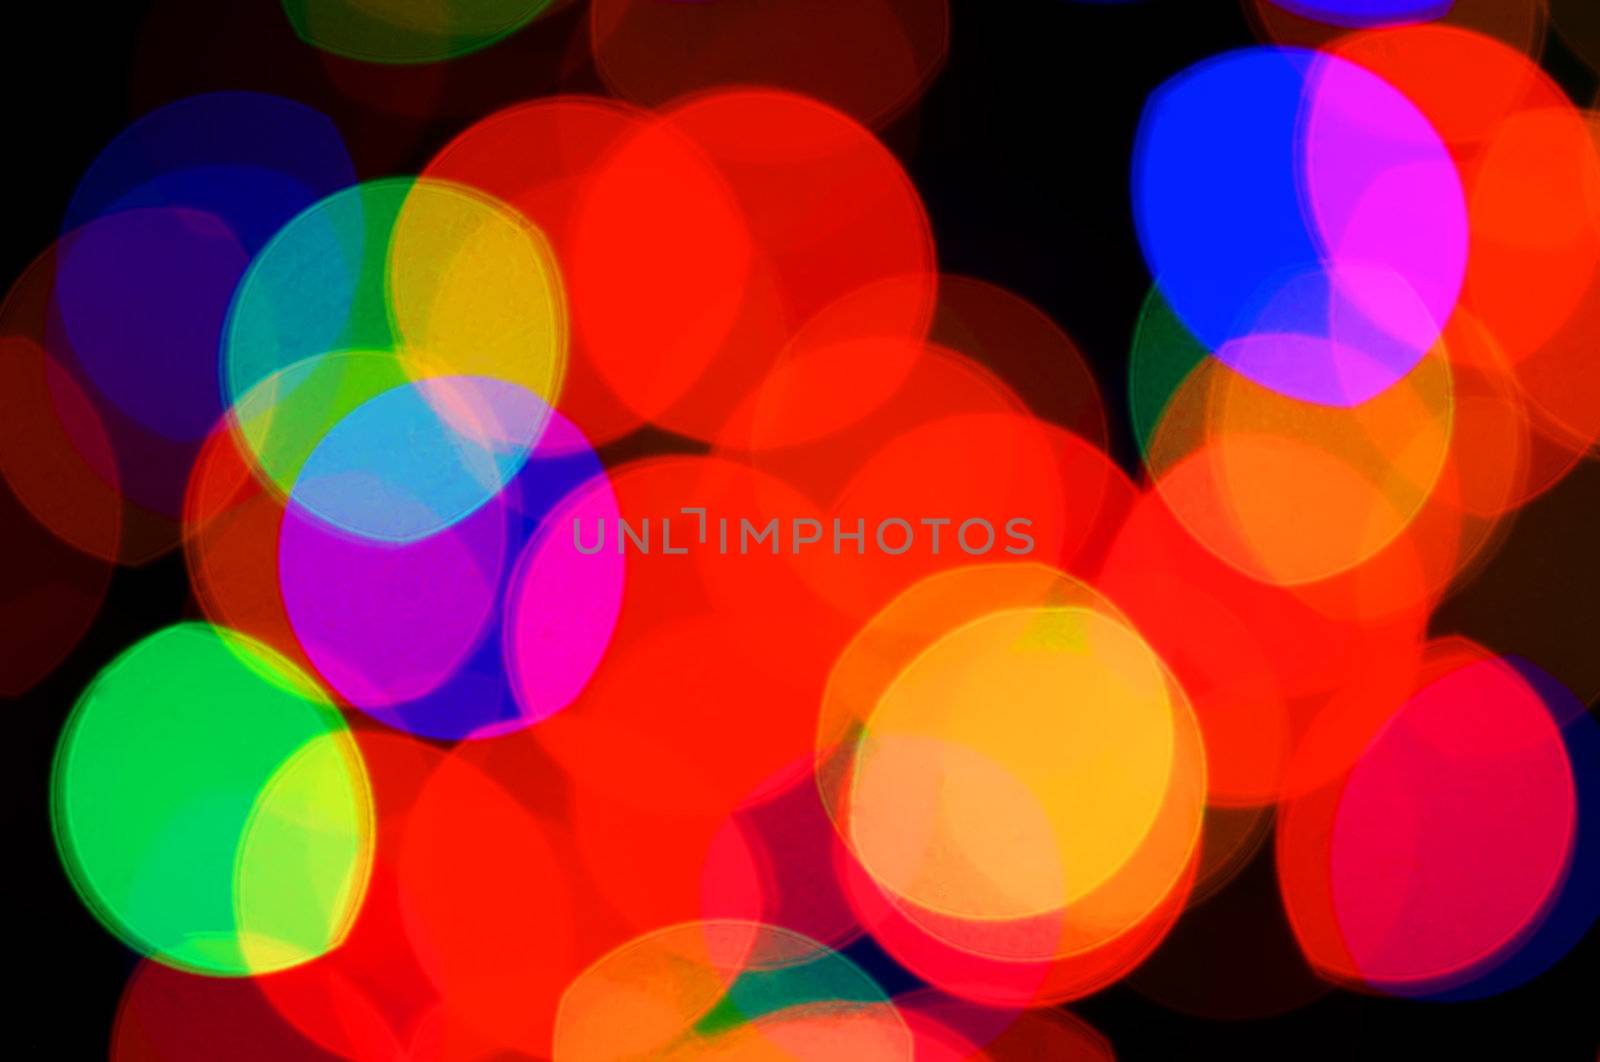 Out of Focus Christmas Lights by gregory21